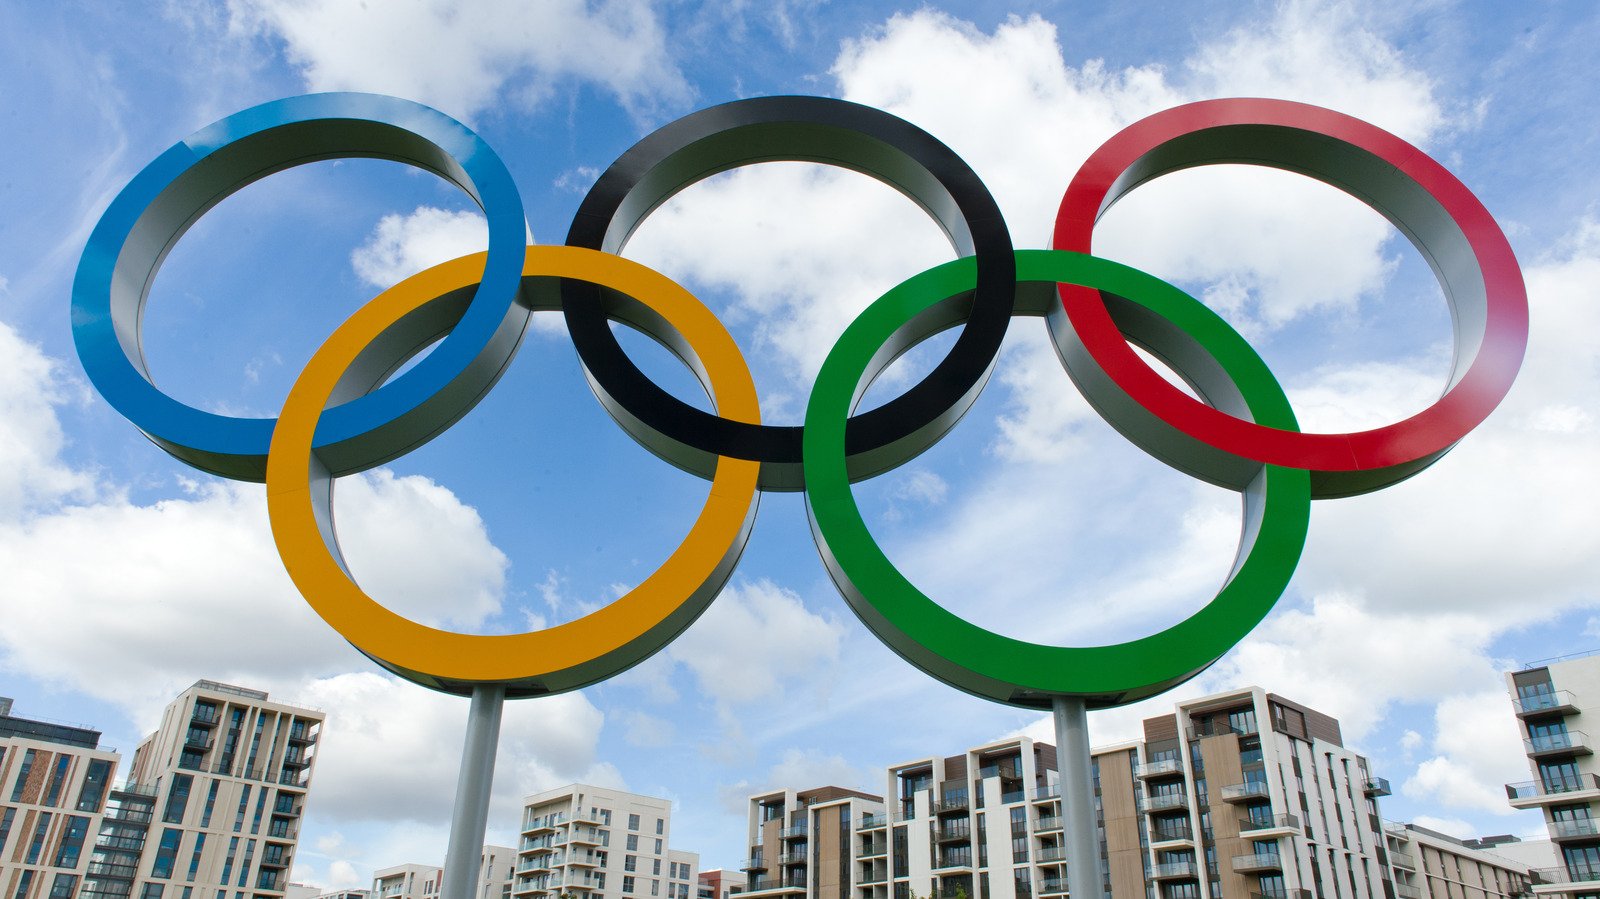 The Untold Truth About The Olympic Village - Grunge